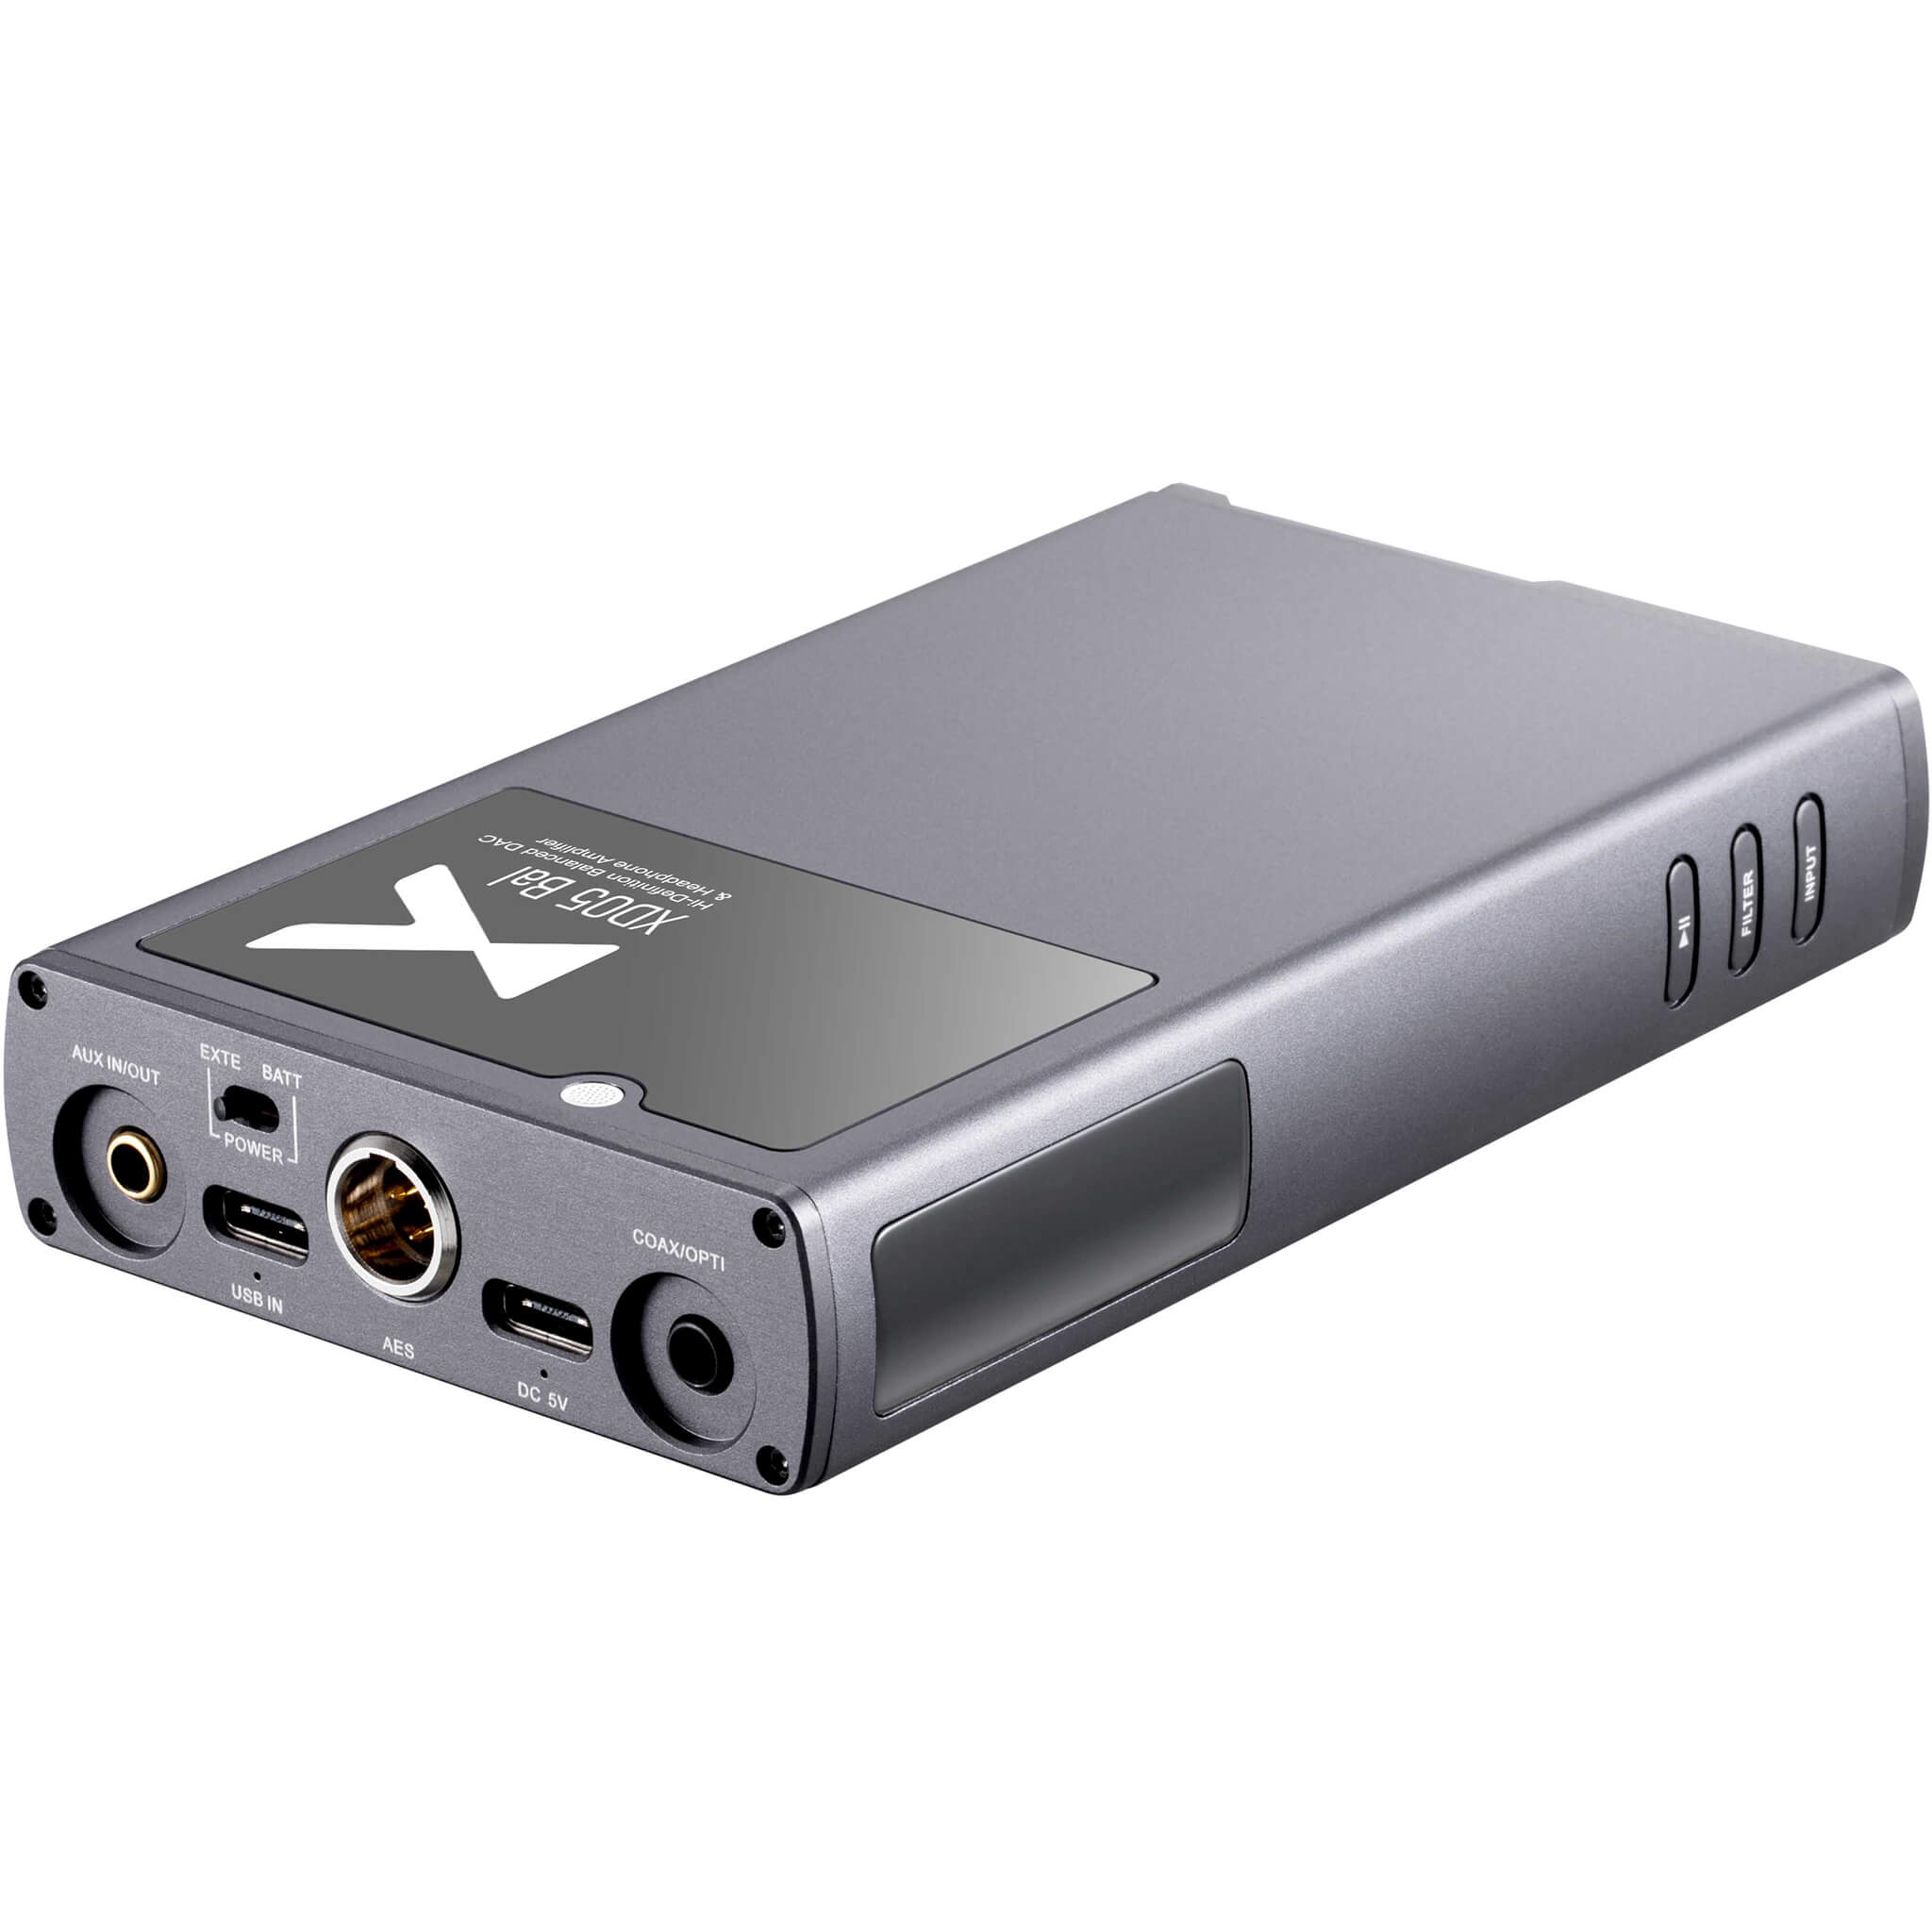 Buy xDuoo XD-05 Bal Headphone Amplifiers at HiFiNage in India with warranty.